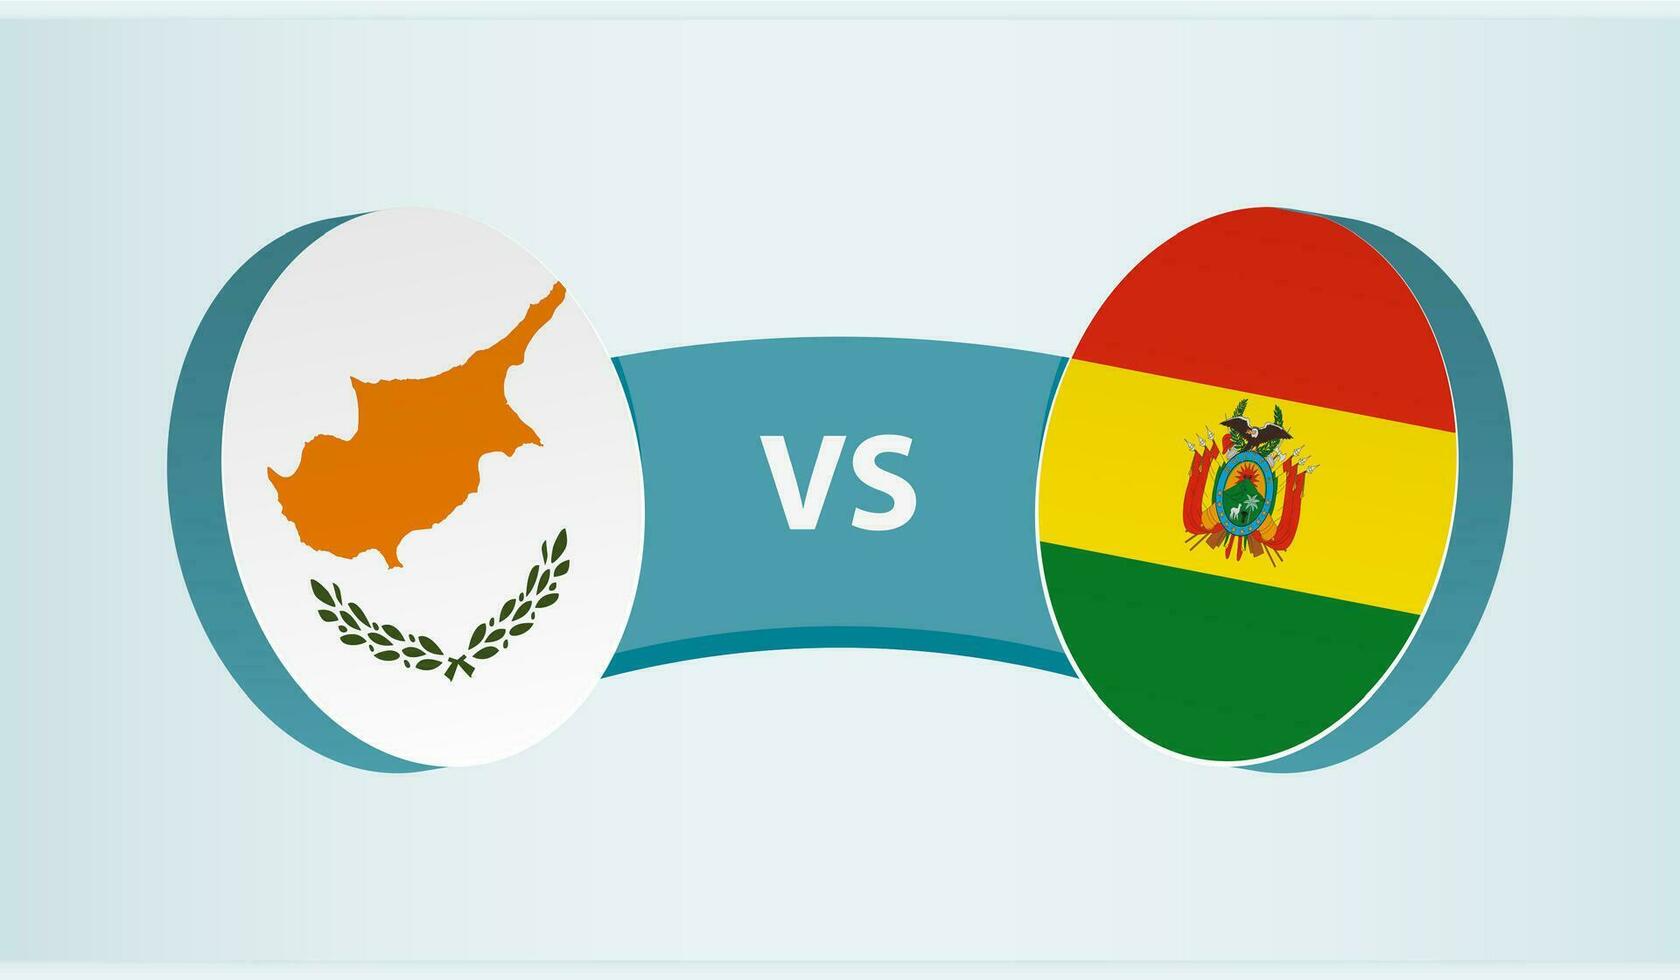 Cyprus versus Bolivia, team sports competition concept. vector